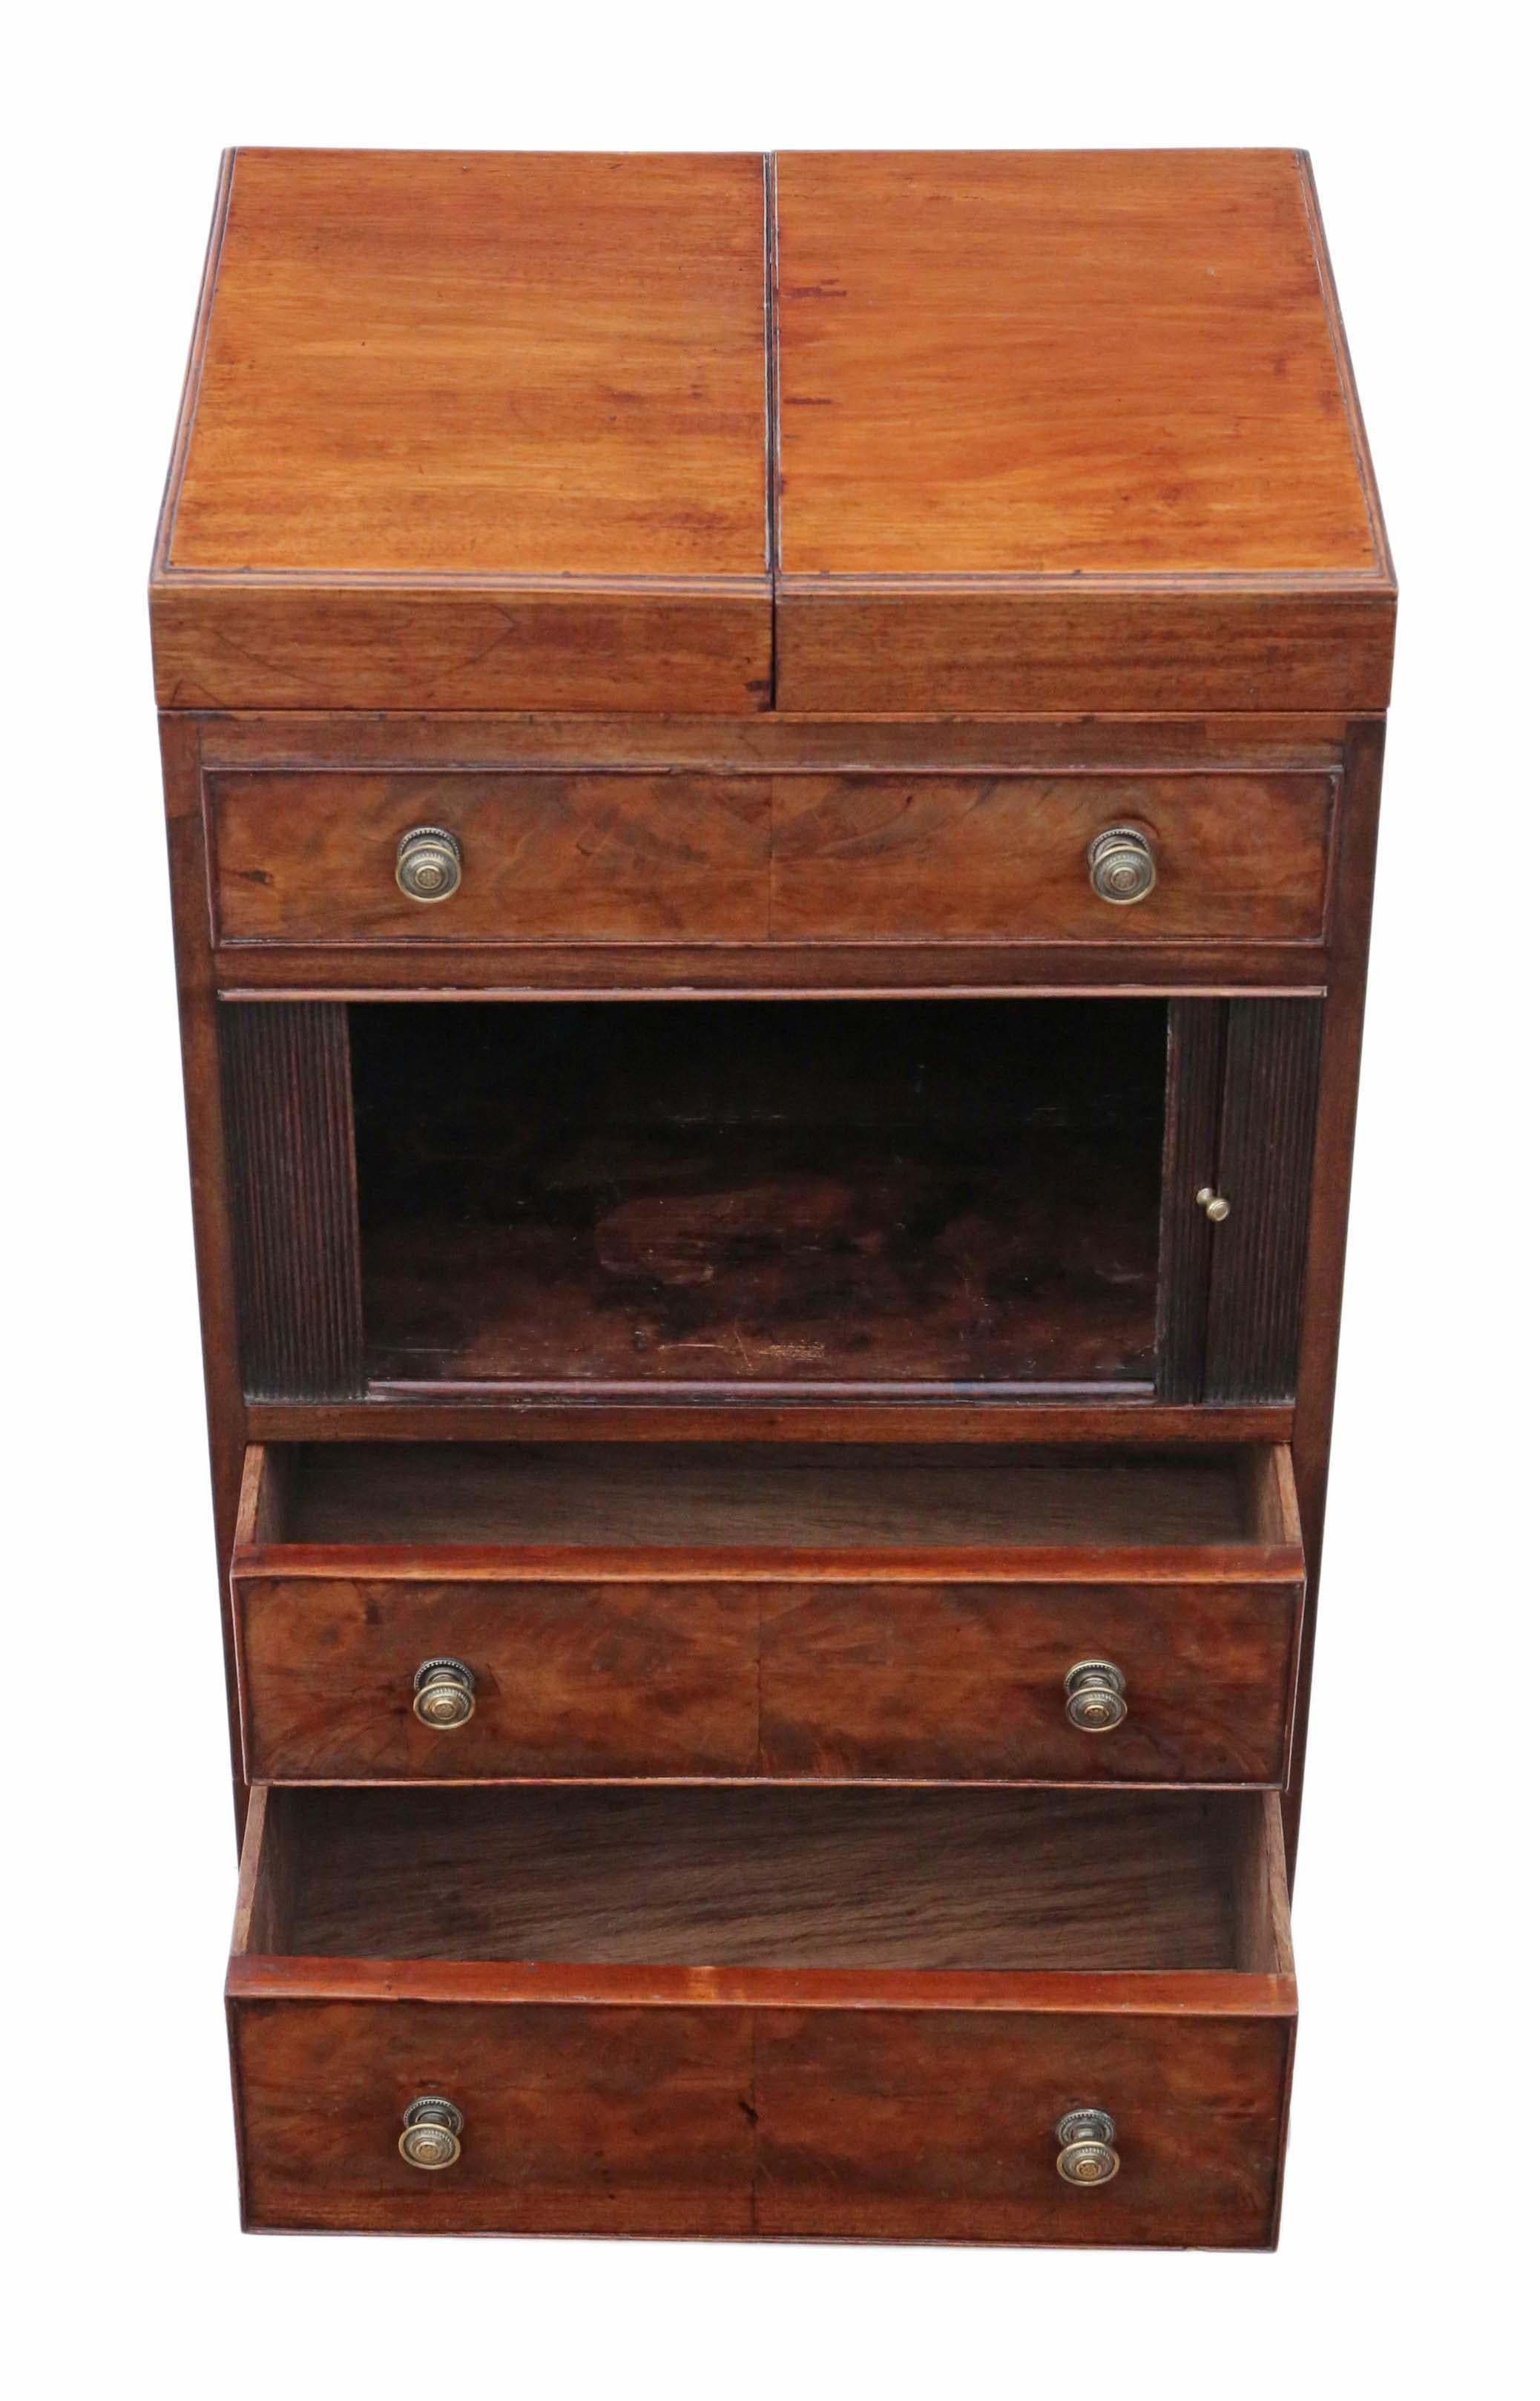 Antique Large Flame Mahogany Washstand Bedside Table, C1800, Georgian 1